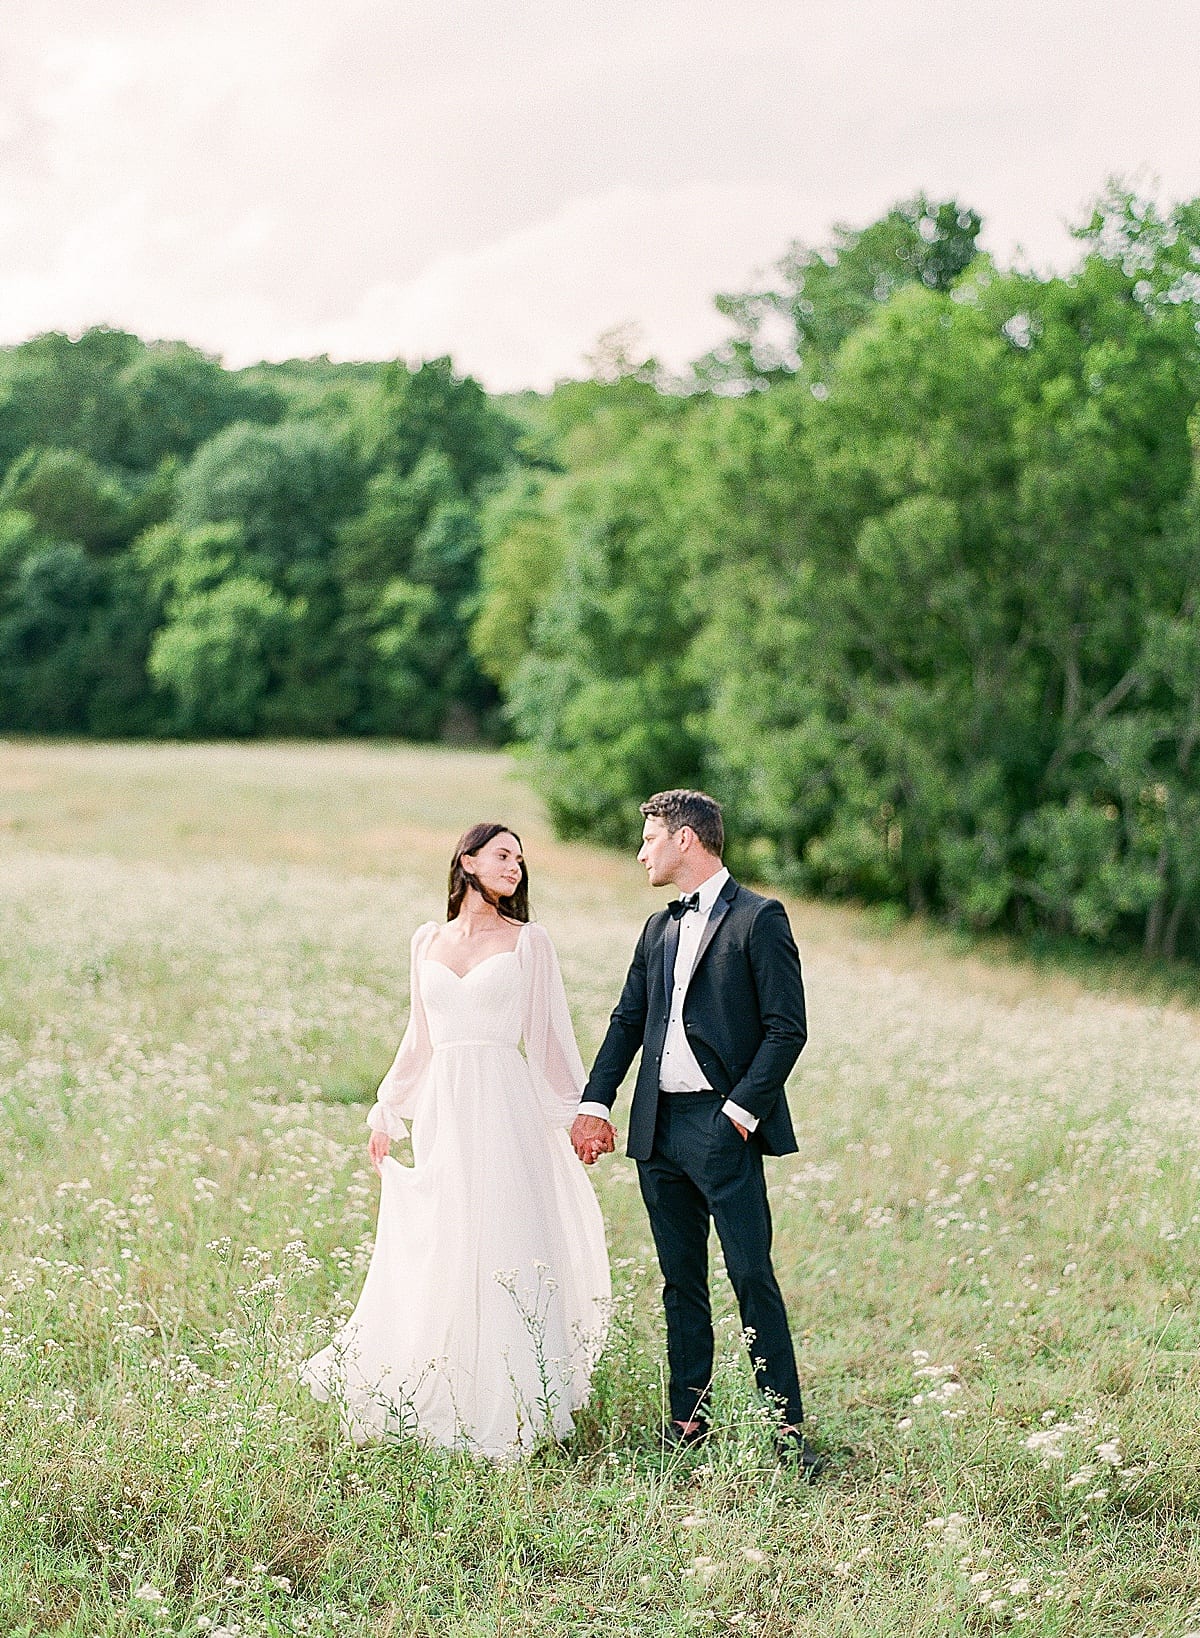 Bride and Groom at Bloomsbury Farm Holding Hands in Field Photo